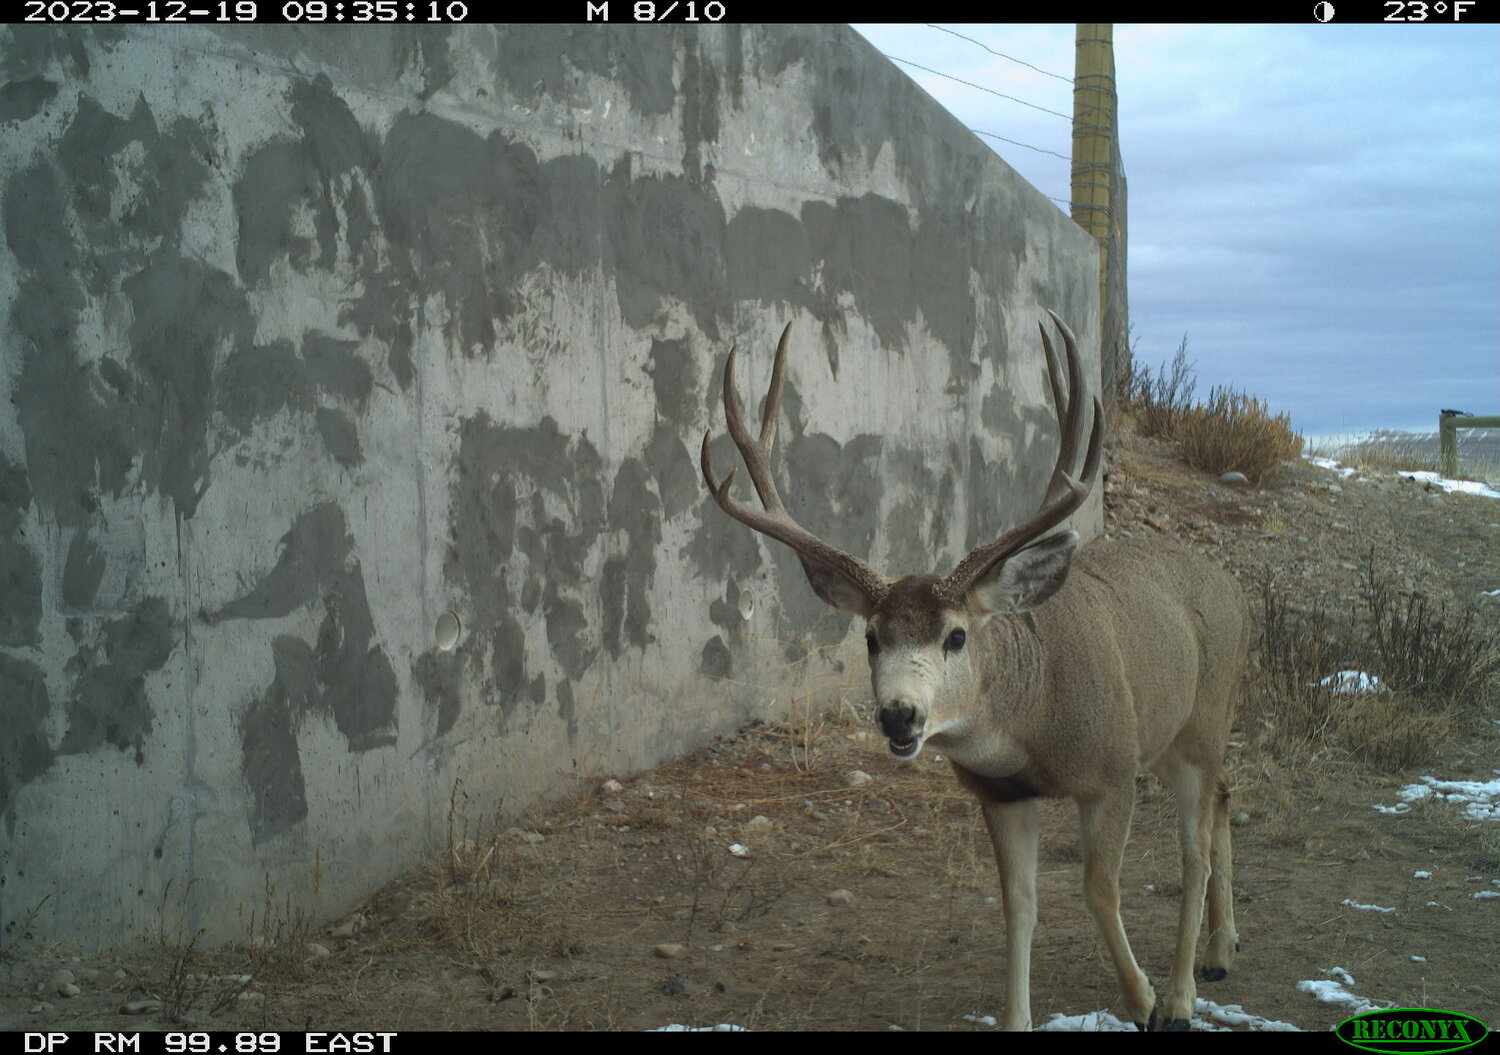 A buck mule deer utilizing an underpass to safely cross the highway between La Barge and Big Piney is captured on camera in this Dec. 19 photo.